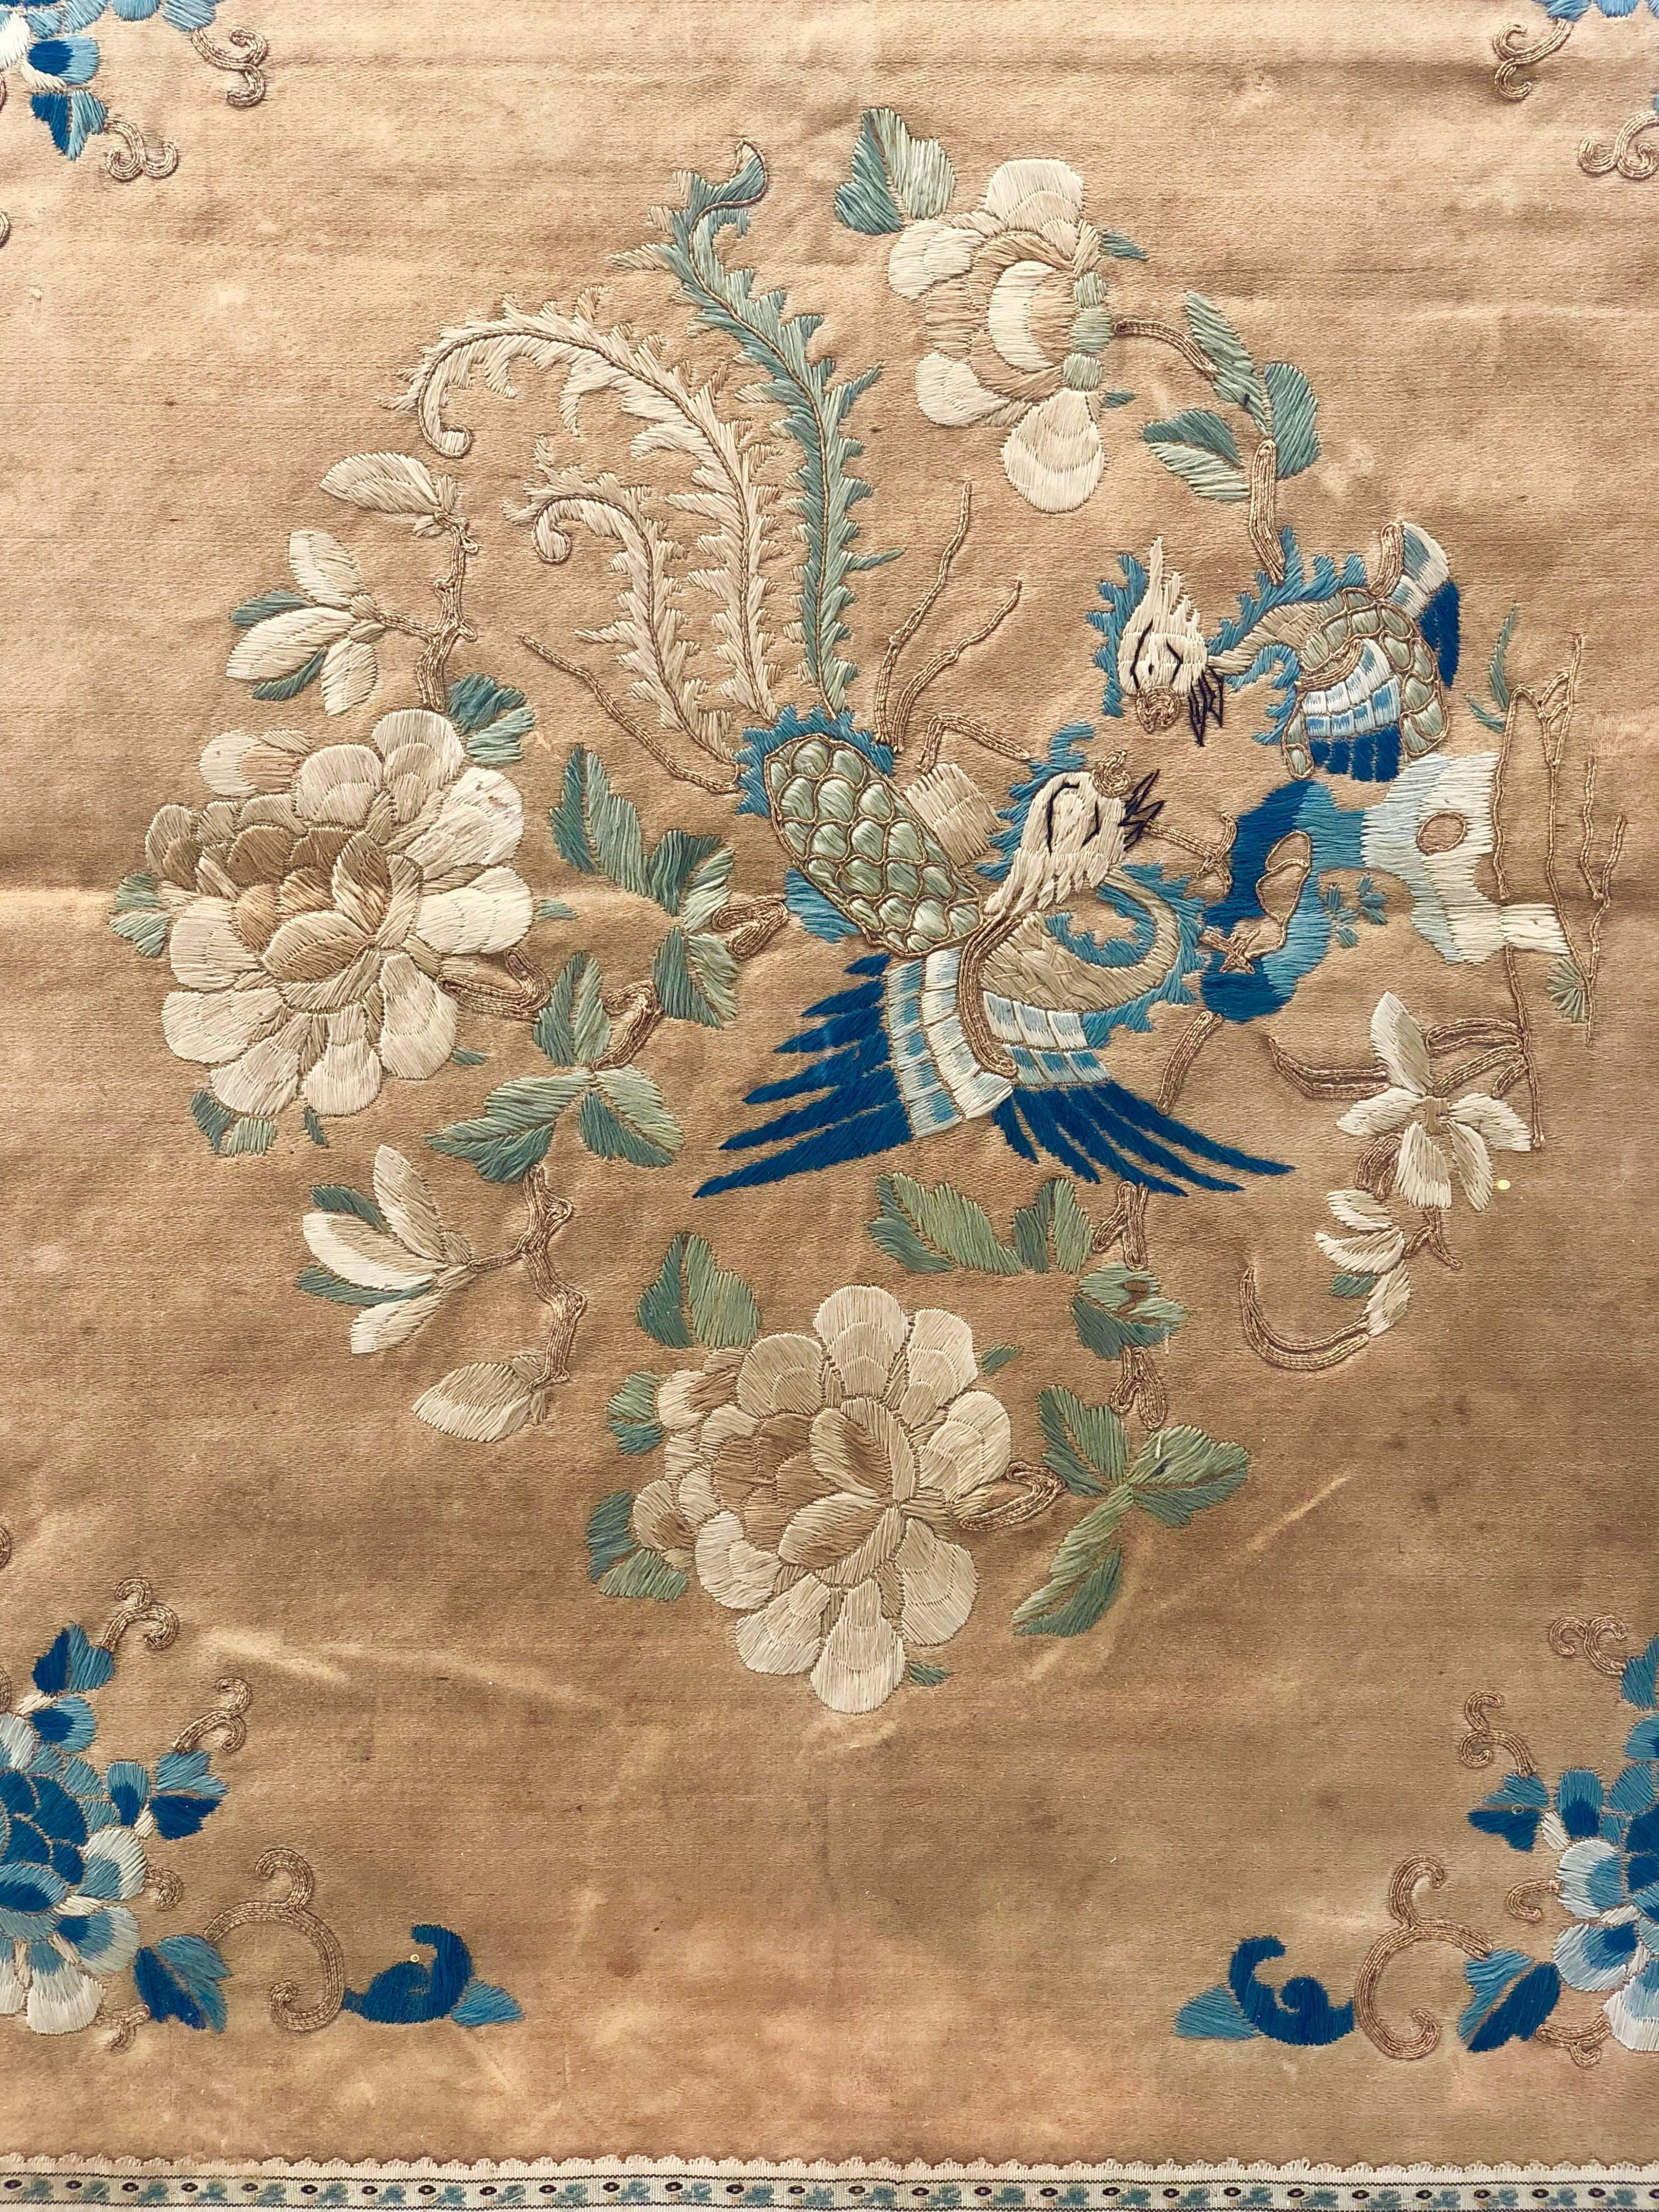 This beautiful framed Chinese silk embroidery shows two birds in a variety of beautiful blue colors with green leaves and cream colored flowers on the center circle and blue and cream colored flowers on the four corners. All are embroidered on a